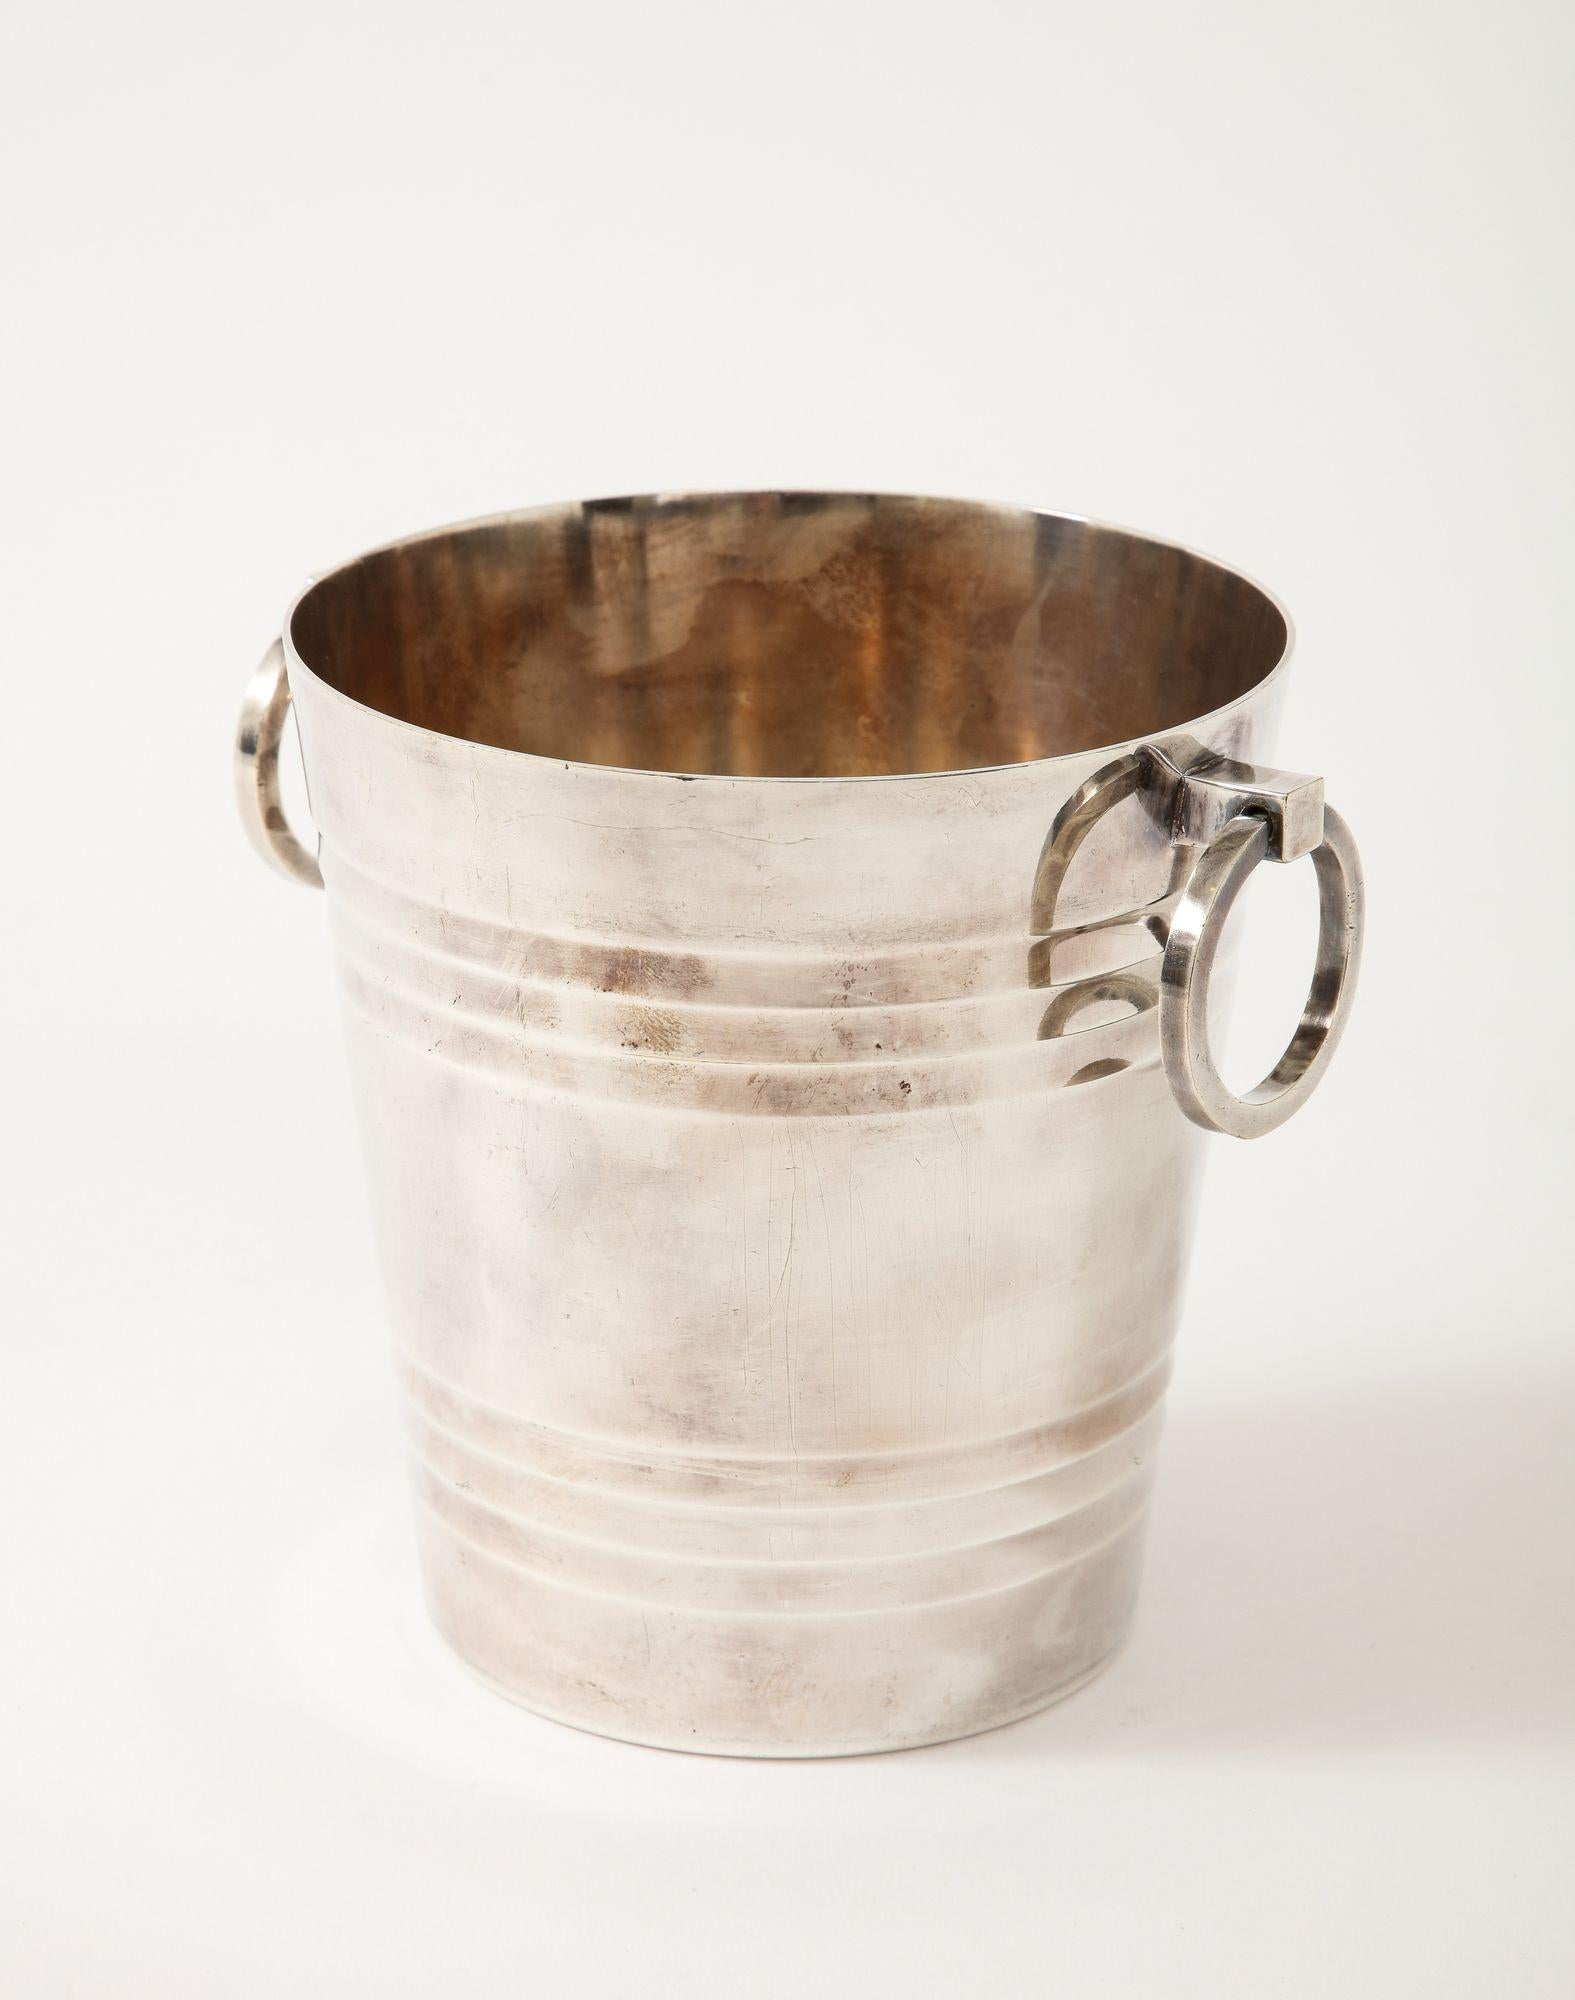 A small Christofle Ice Bucket from the Normondie collection.